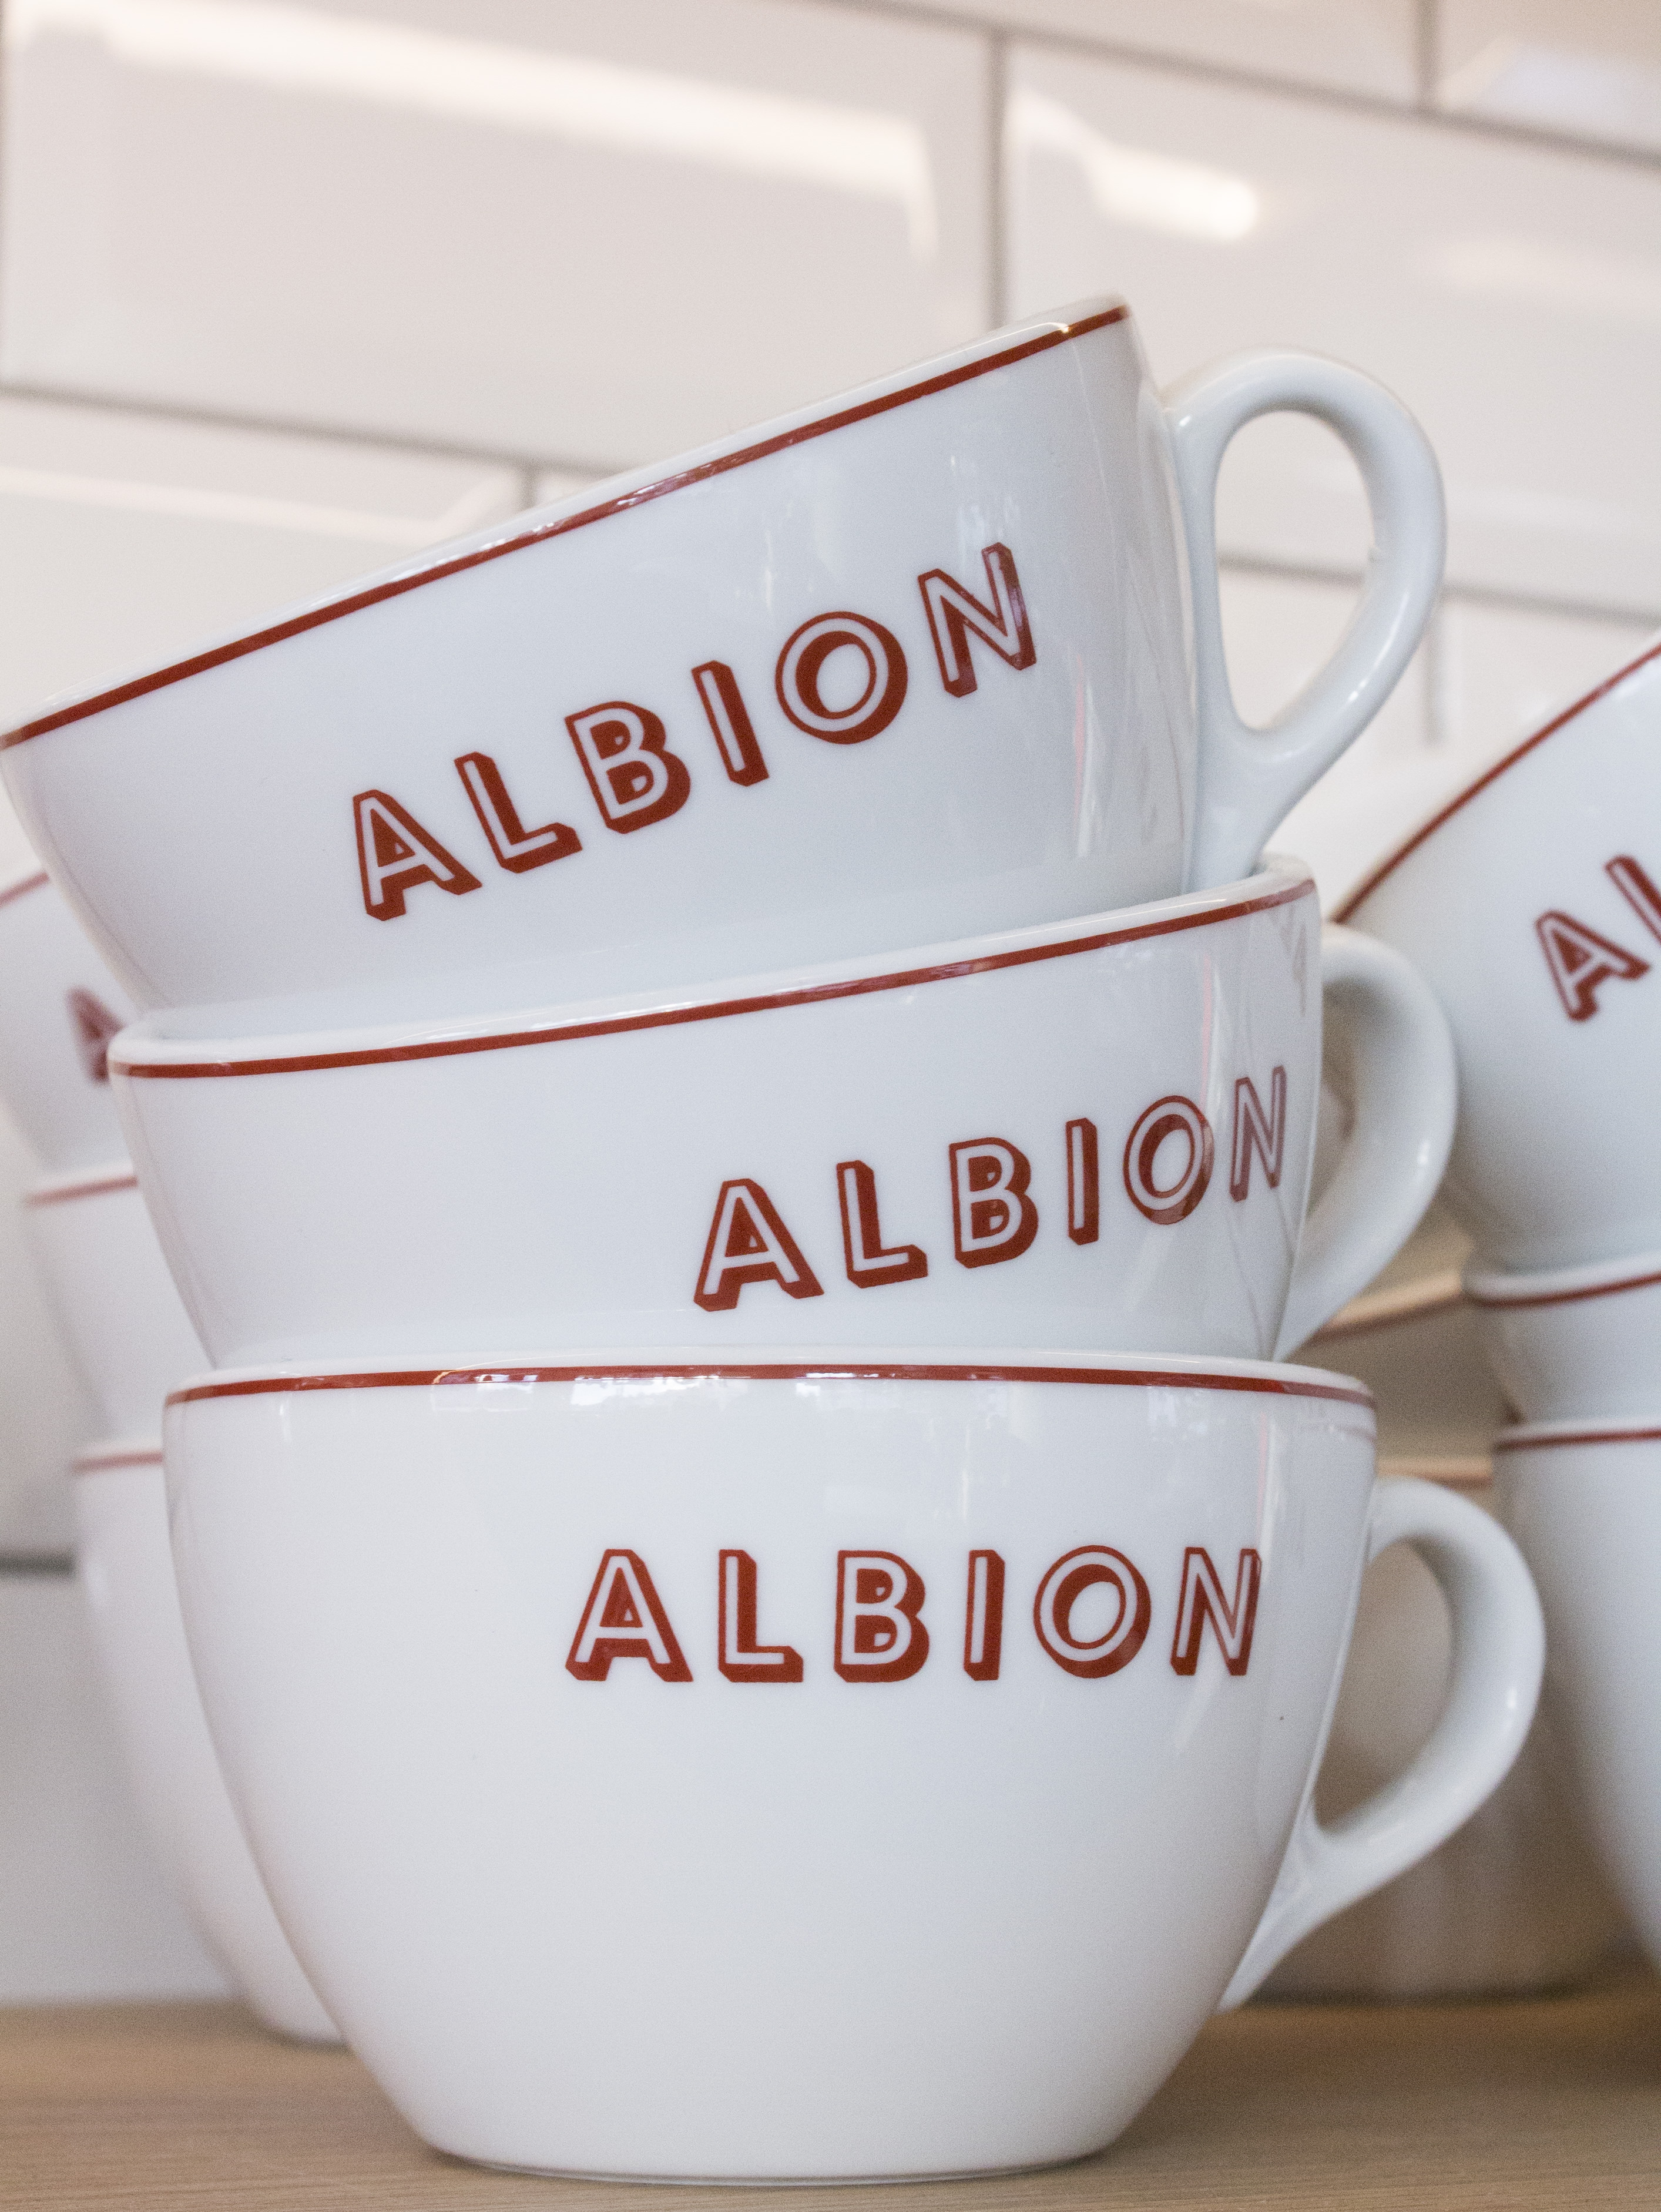 Albion-London-coffee-cups-photo-by-Little-Big-Bell